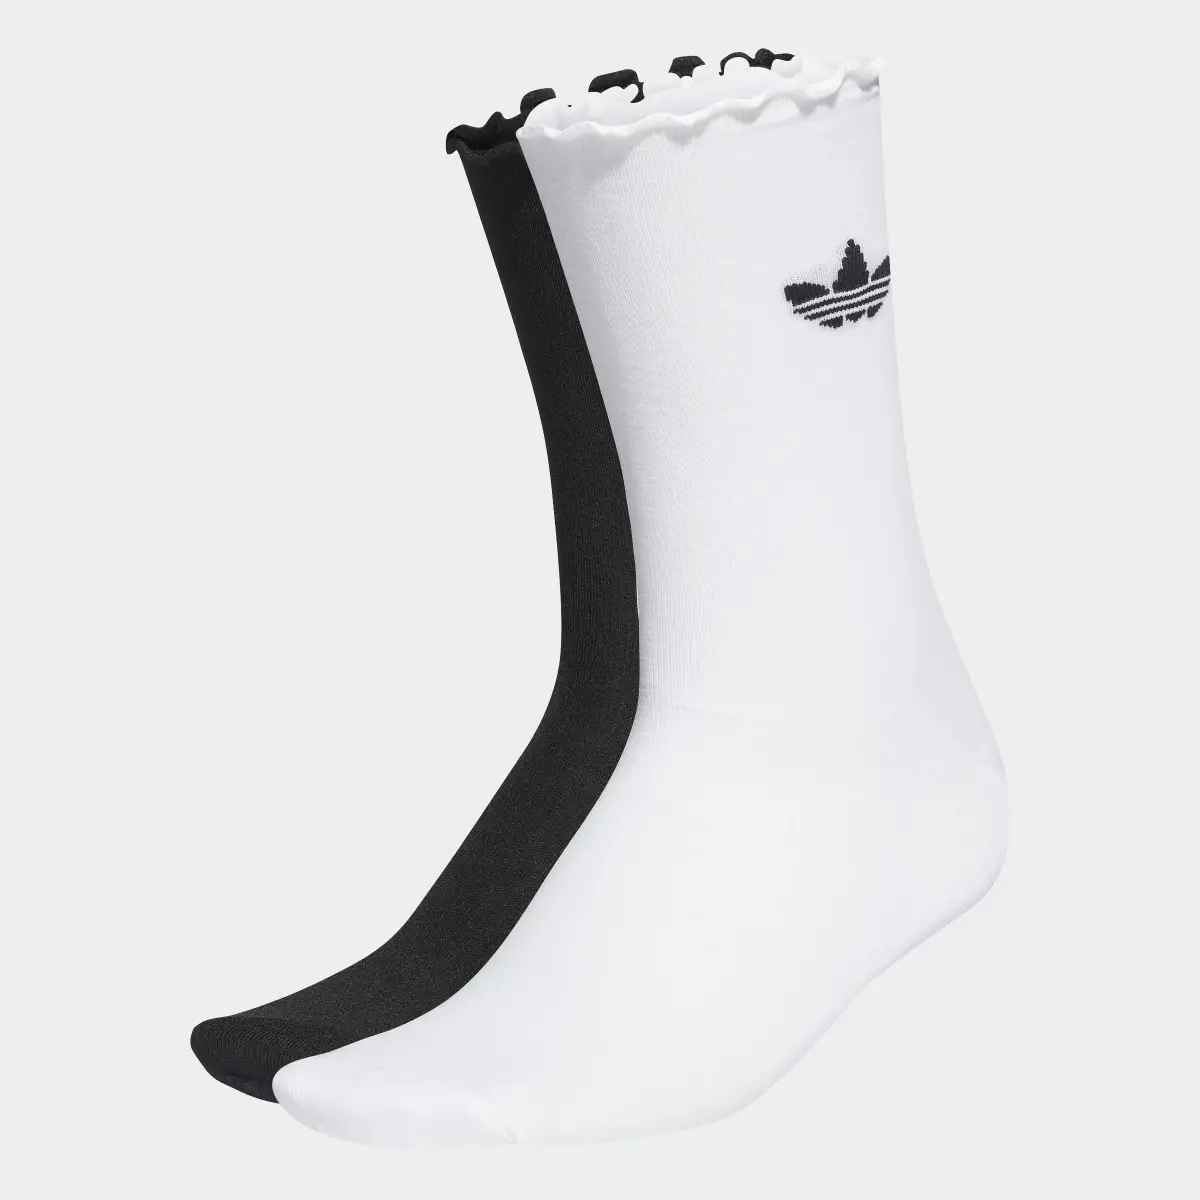 Adidas Chaussette Semi-Sheer Ruffle (2 paires). 1